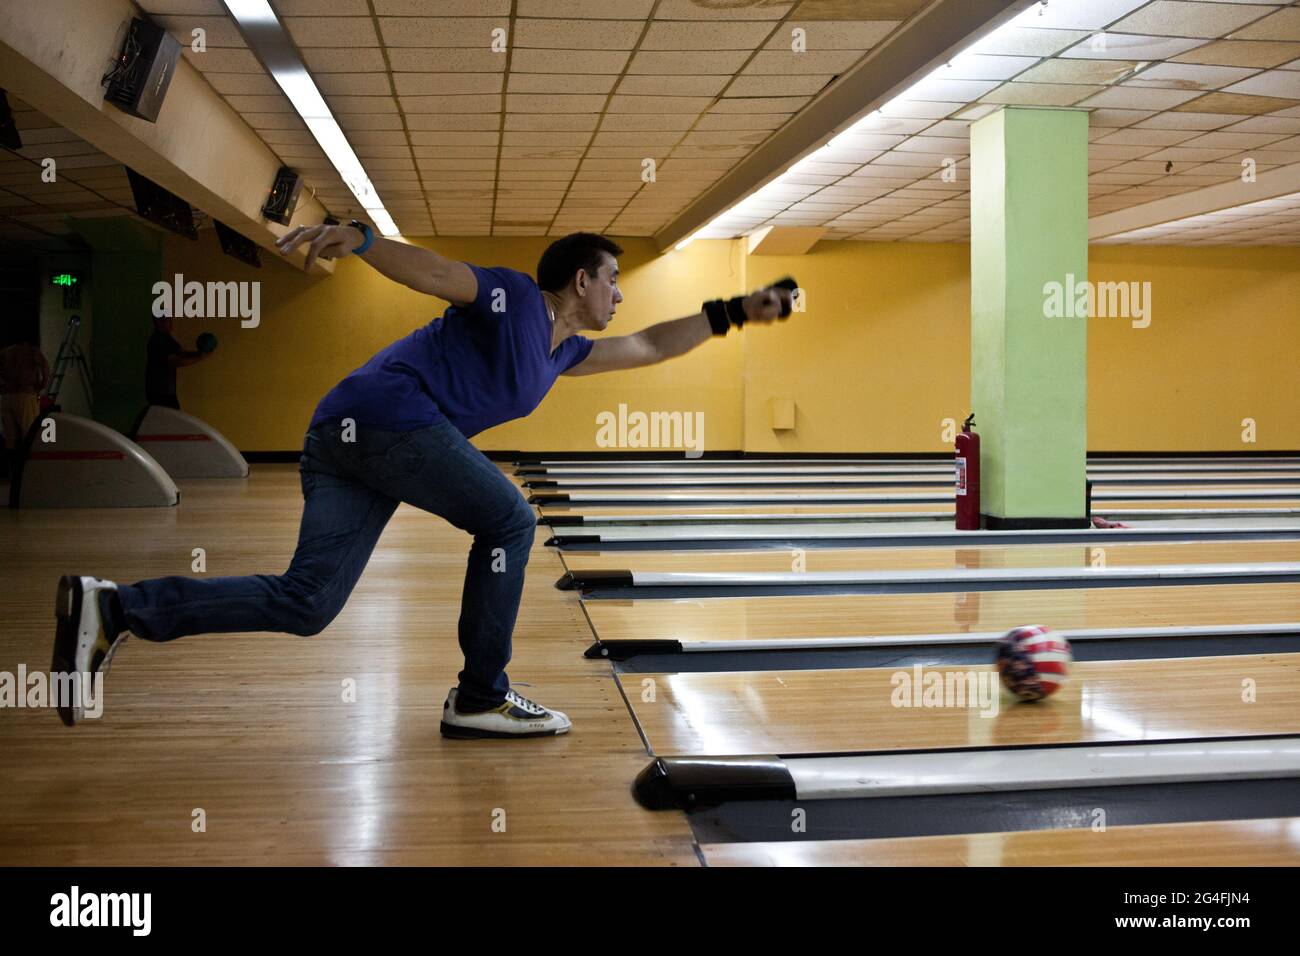 Rafael 'Paeng' Nepomuceno, World Champion many times and considered the best international bowler ever, training at a bowling alley in Makati, Manila. Stock Photo